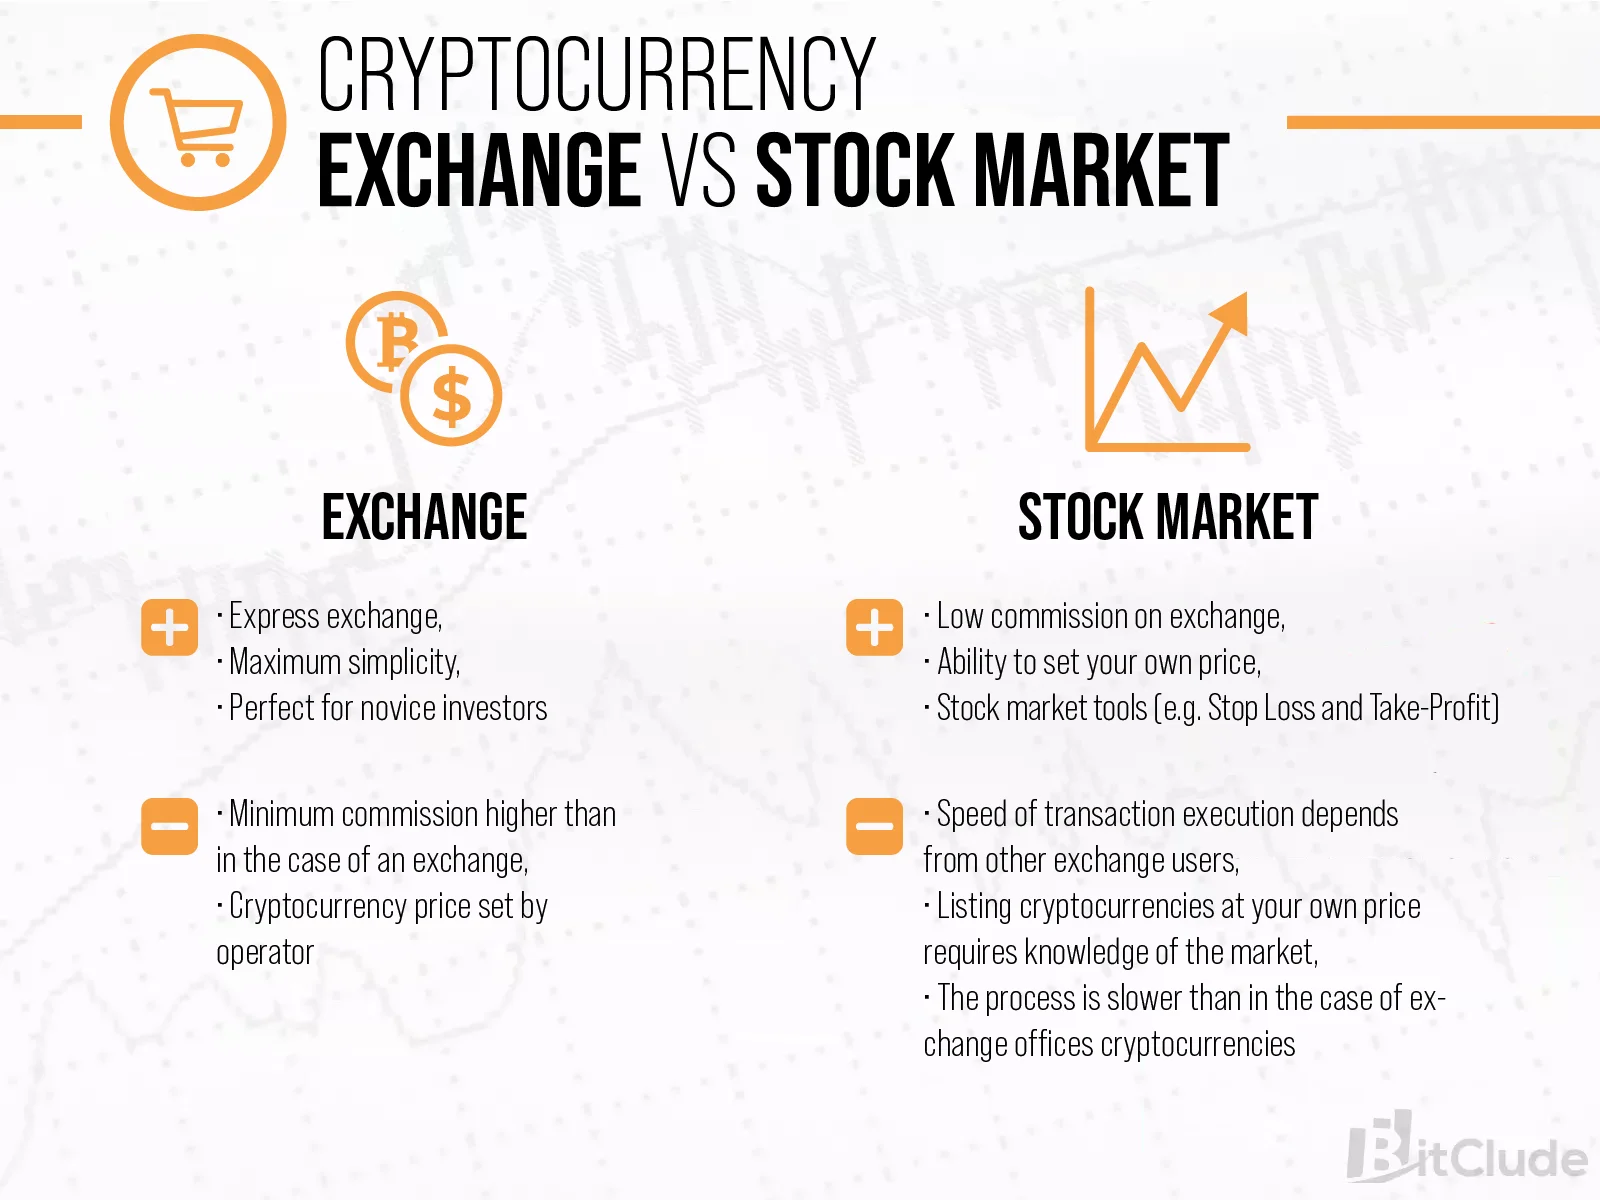 Currency exchange is undoubtedly a simpler and faster solution, but it is the cryptocurrency exchange that gives the investor full opportunities.